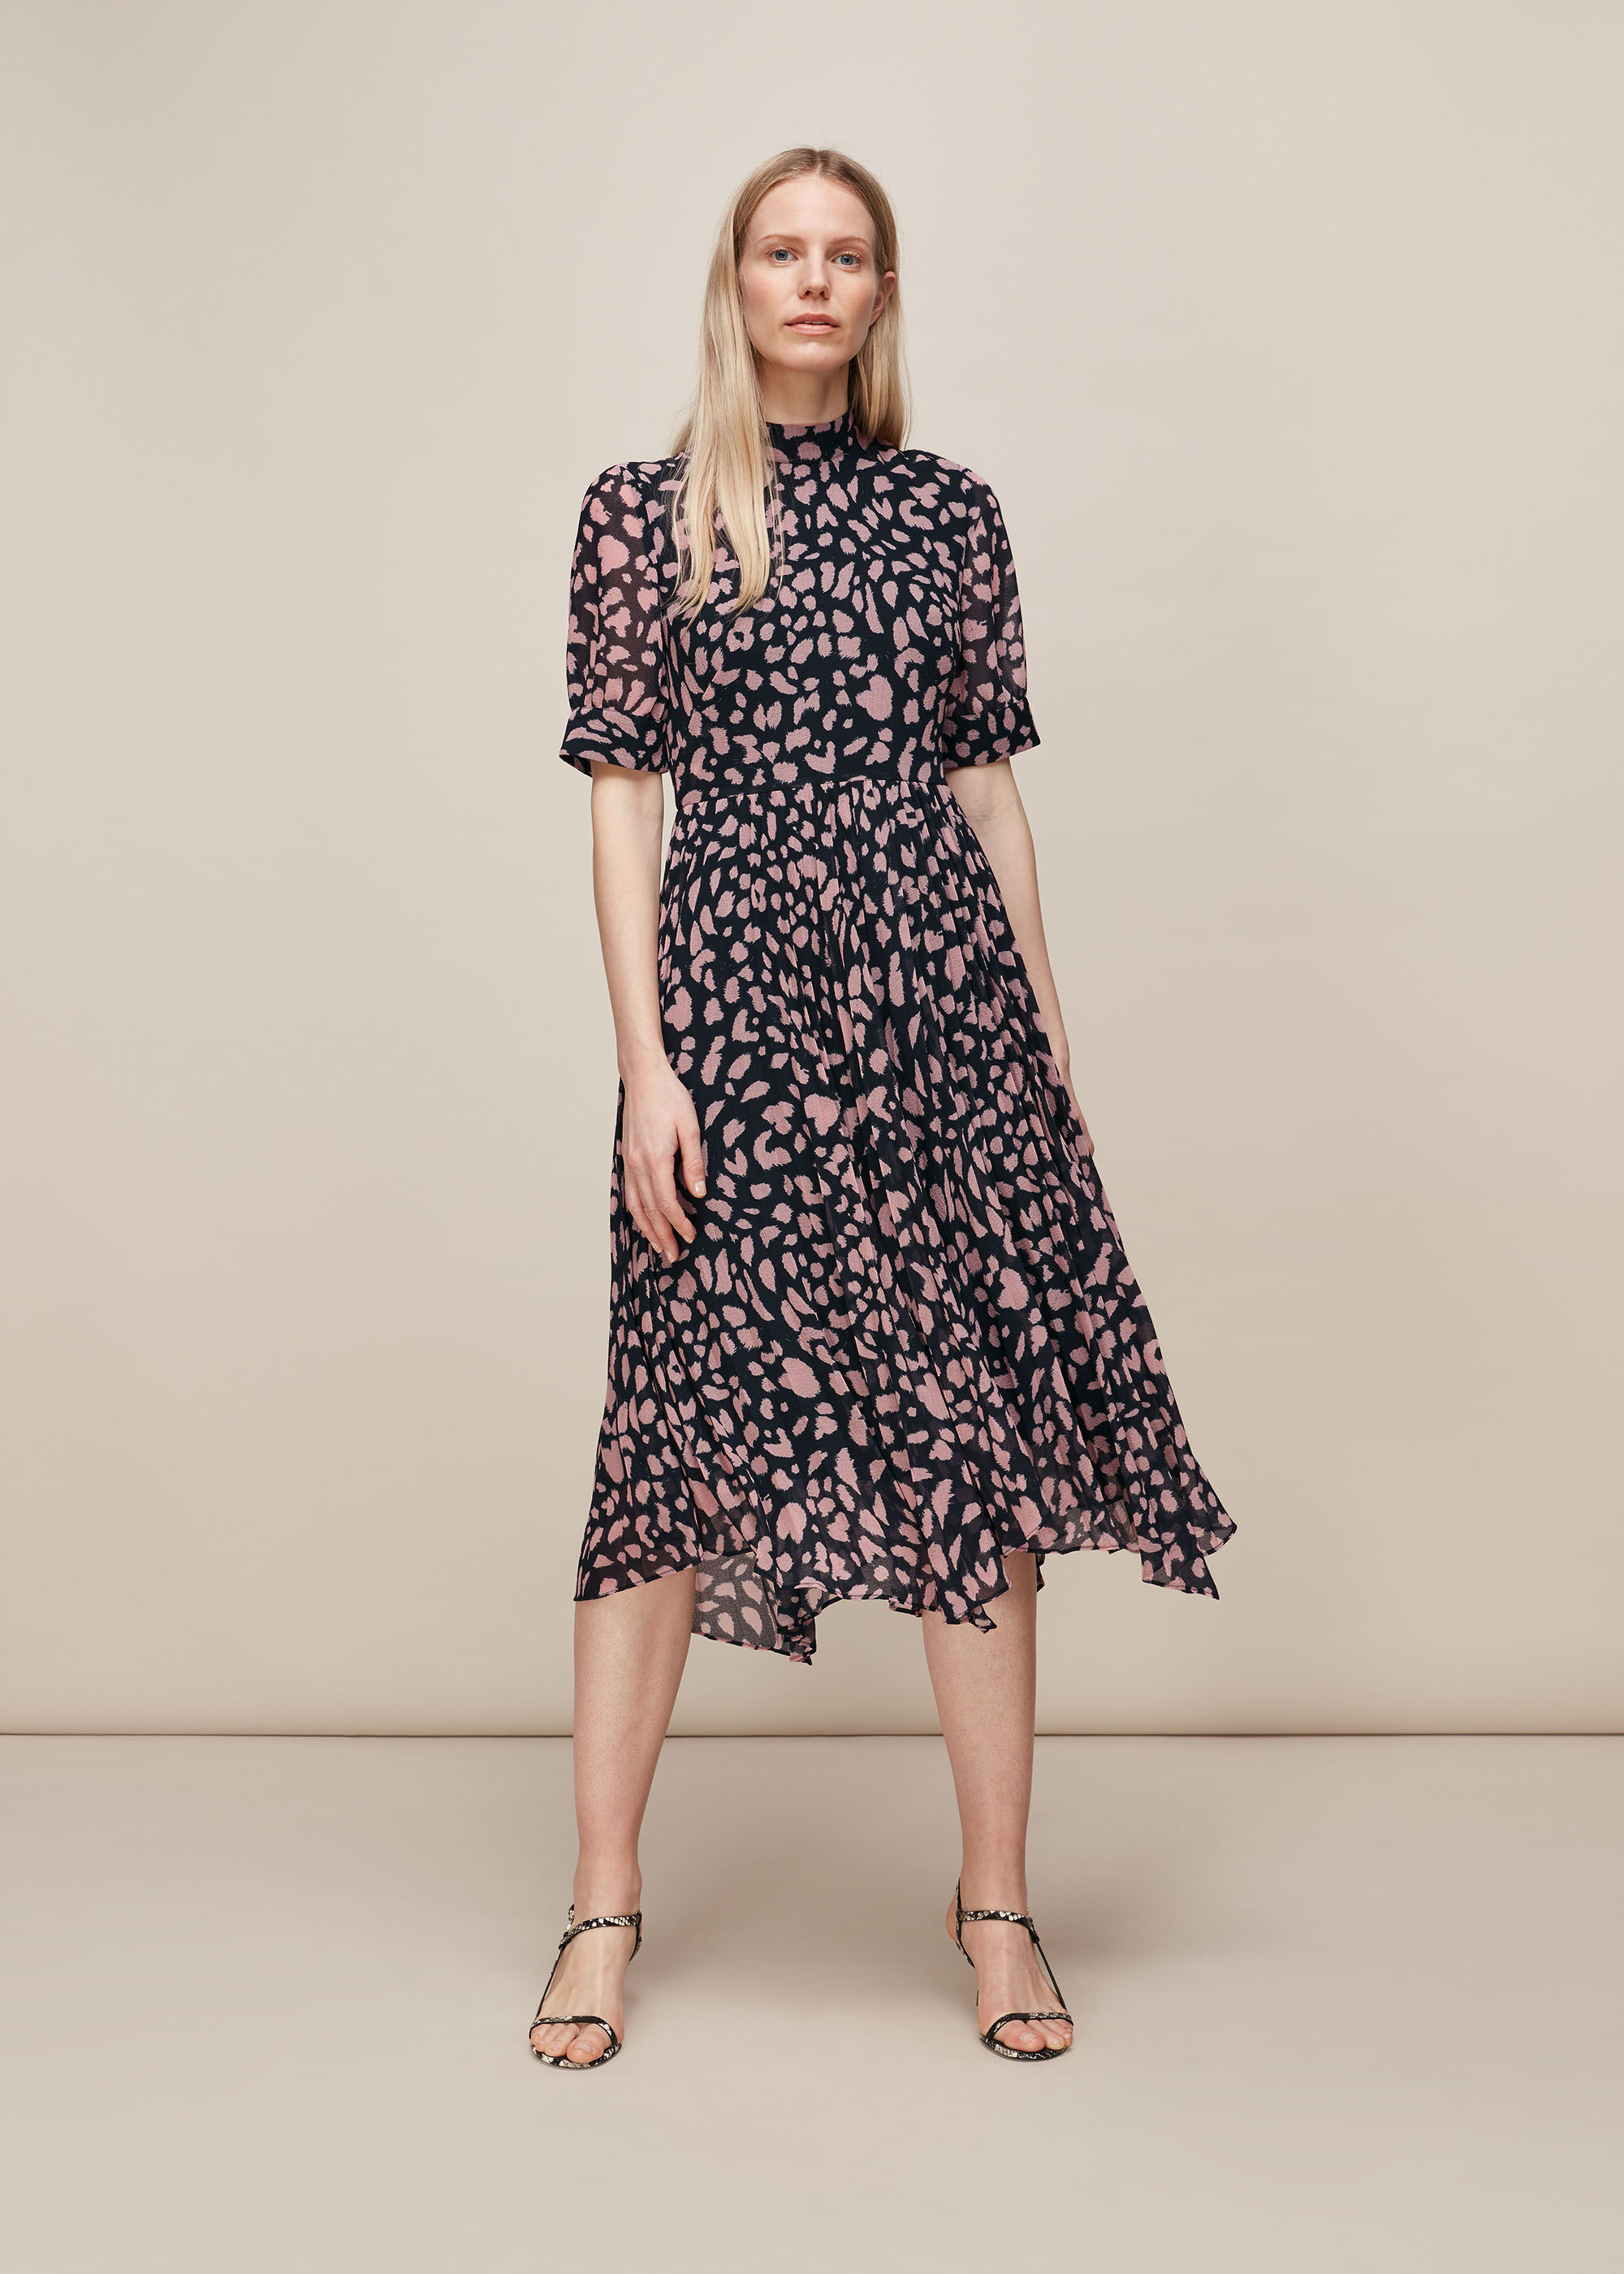 Whistles Dresses Top Sellers, UP TO 60% OFF | www.rupit.com